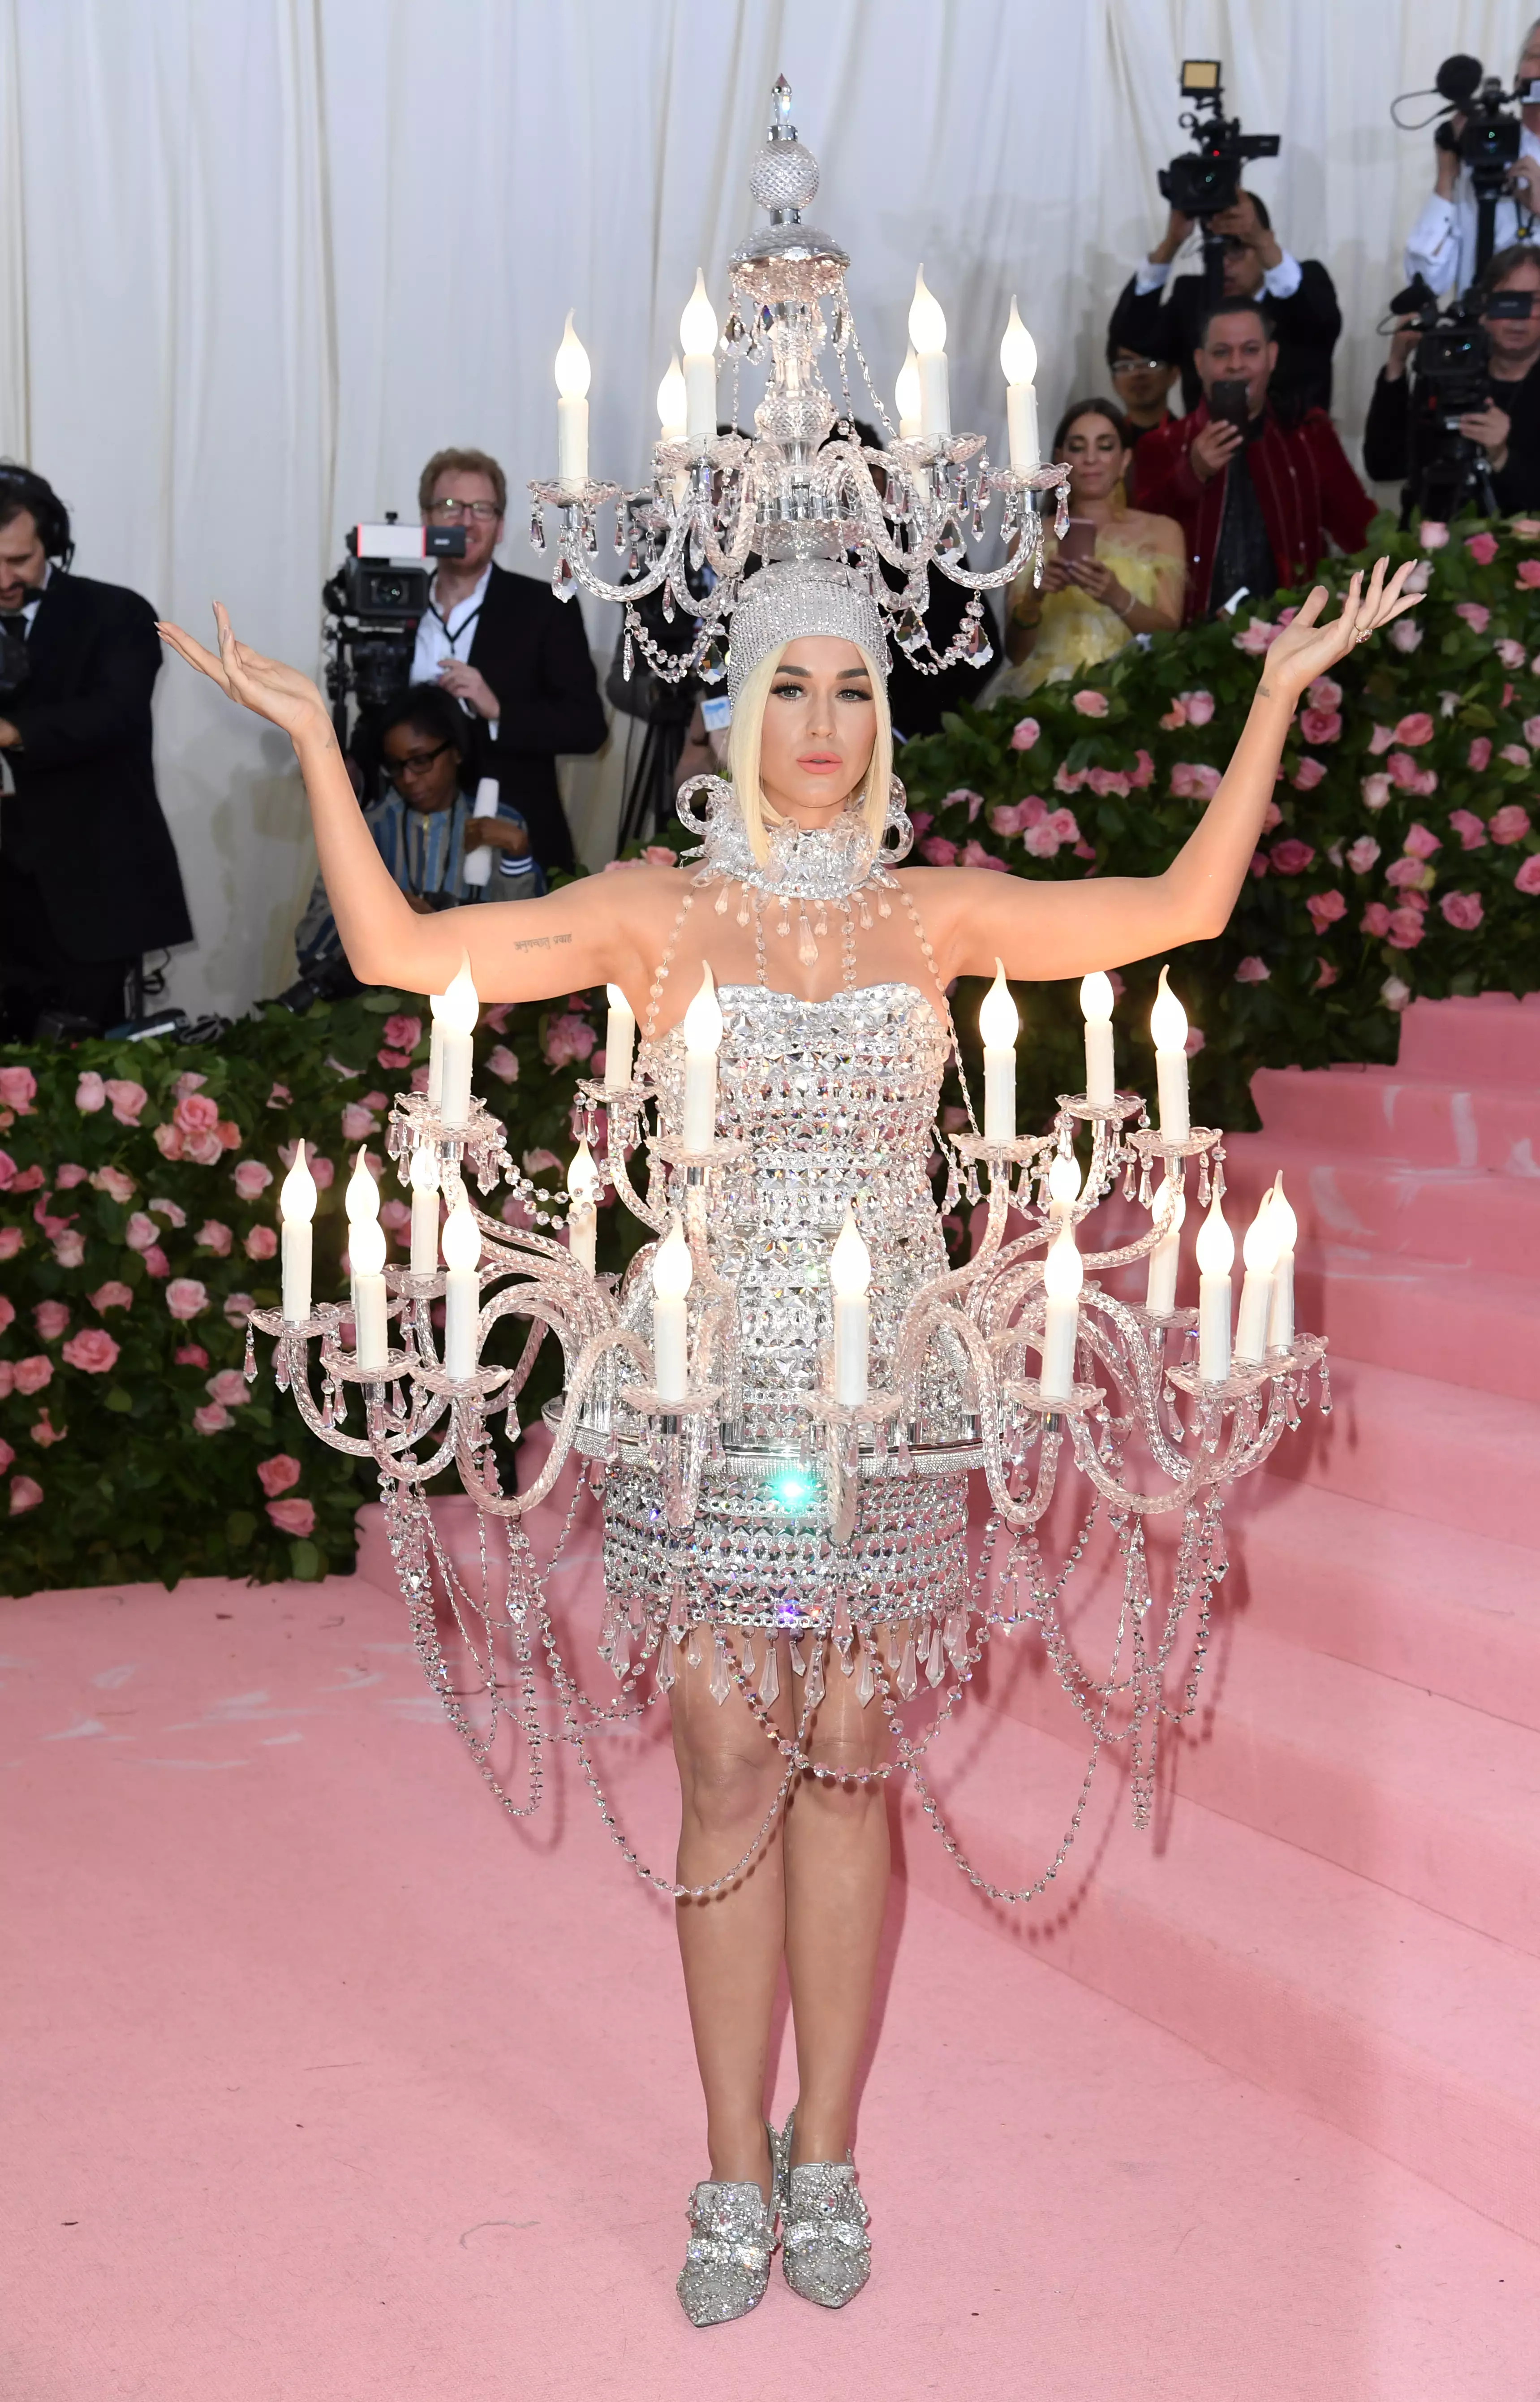 Katy Perry turned up as a light fixture.